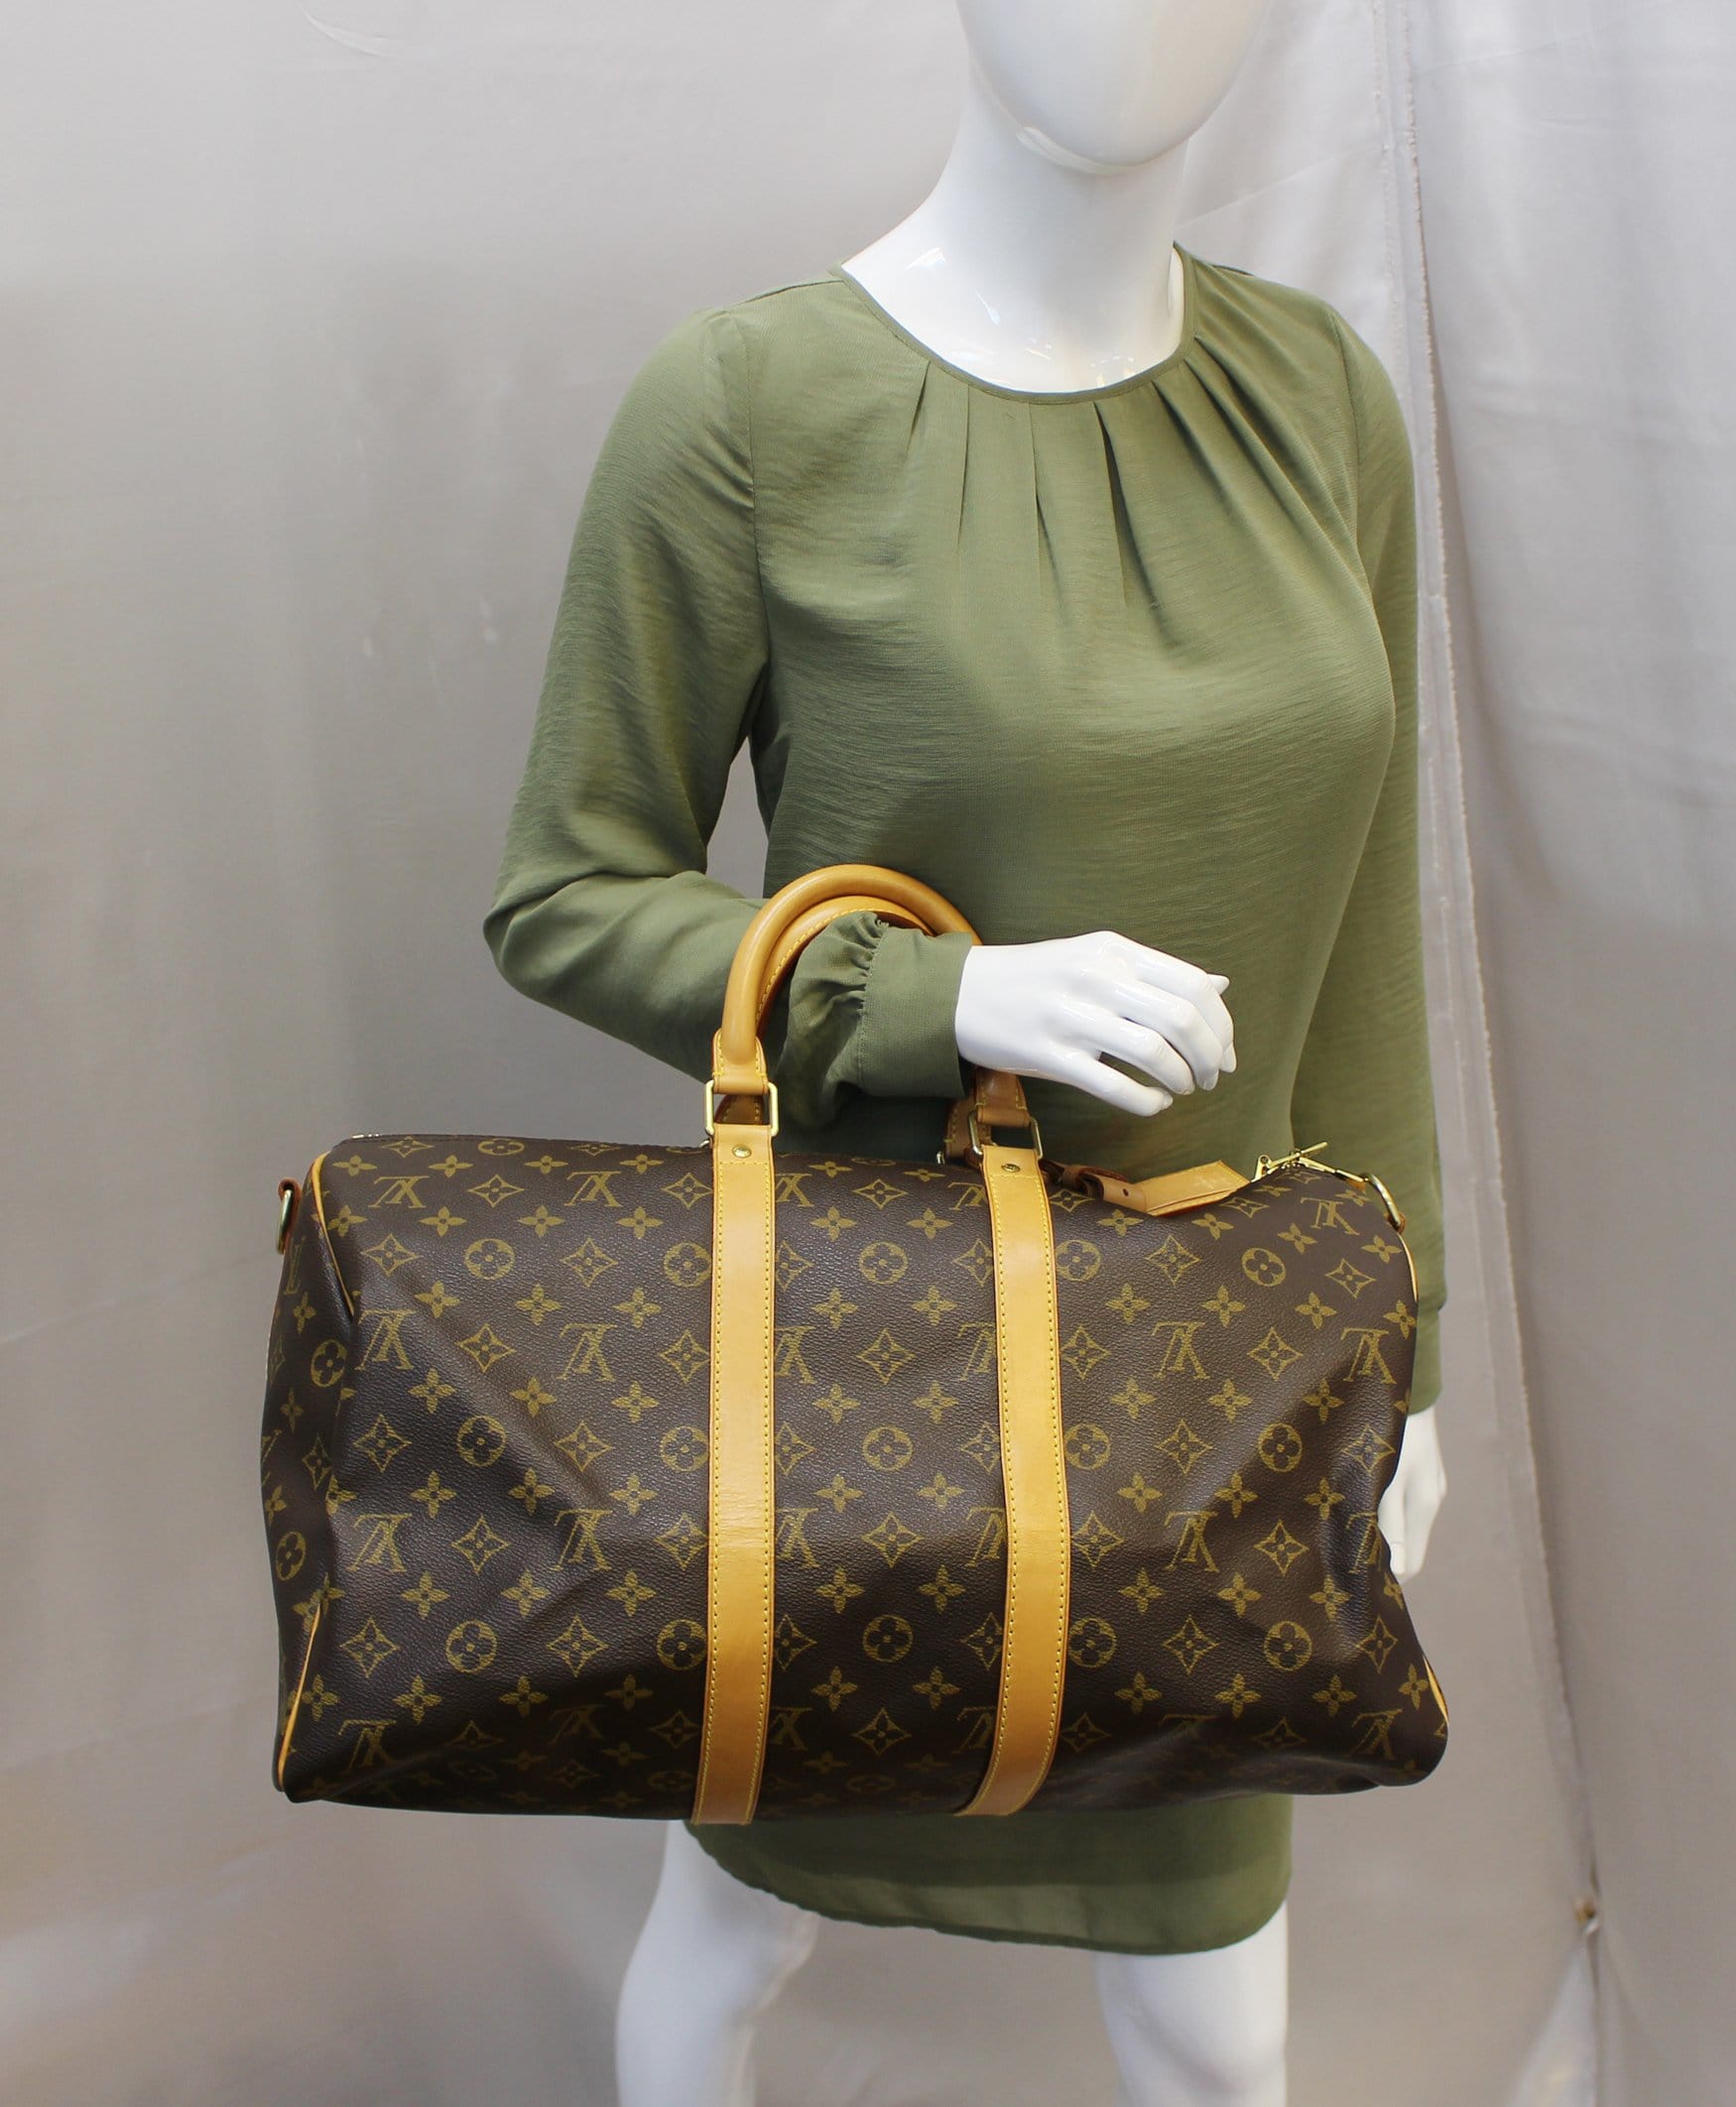 Louis Vuitton Keepall Duffle Bag 45 Monogram Canvas – Coco Approved Studio